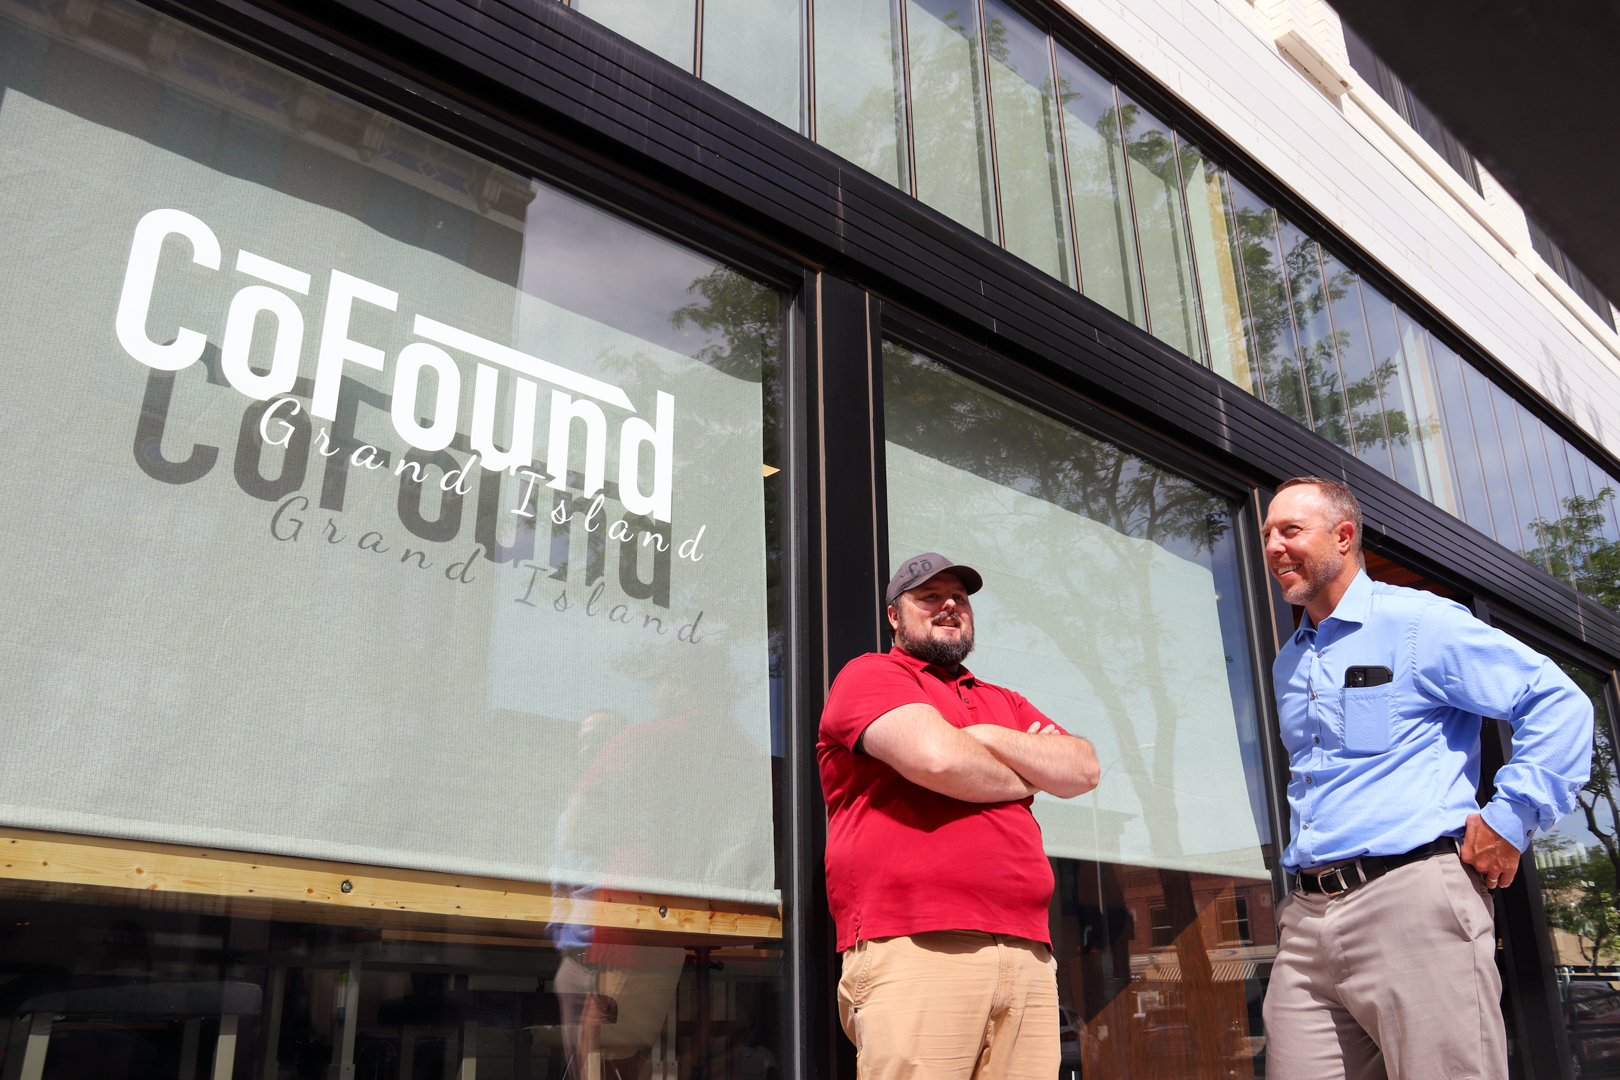 Shawn Kaskie Meets with founder of Co-Found in Grand Island. Photo by Russell Shaffer